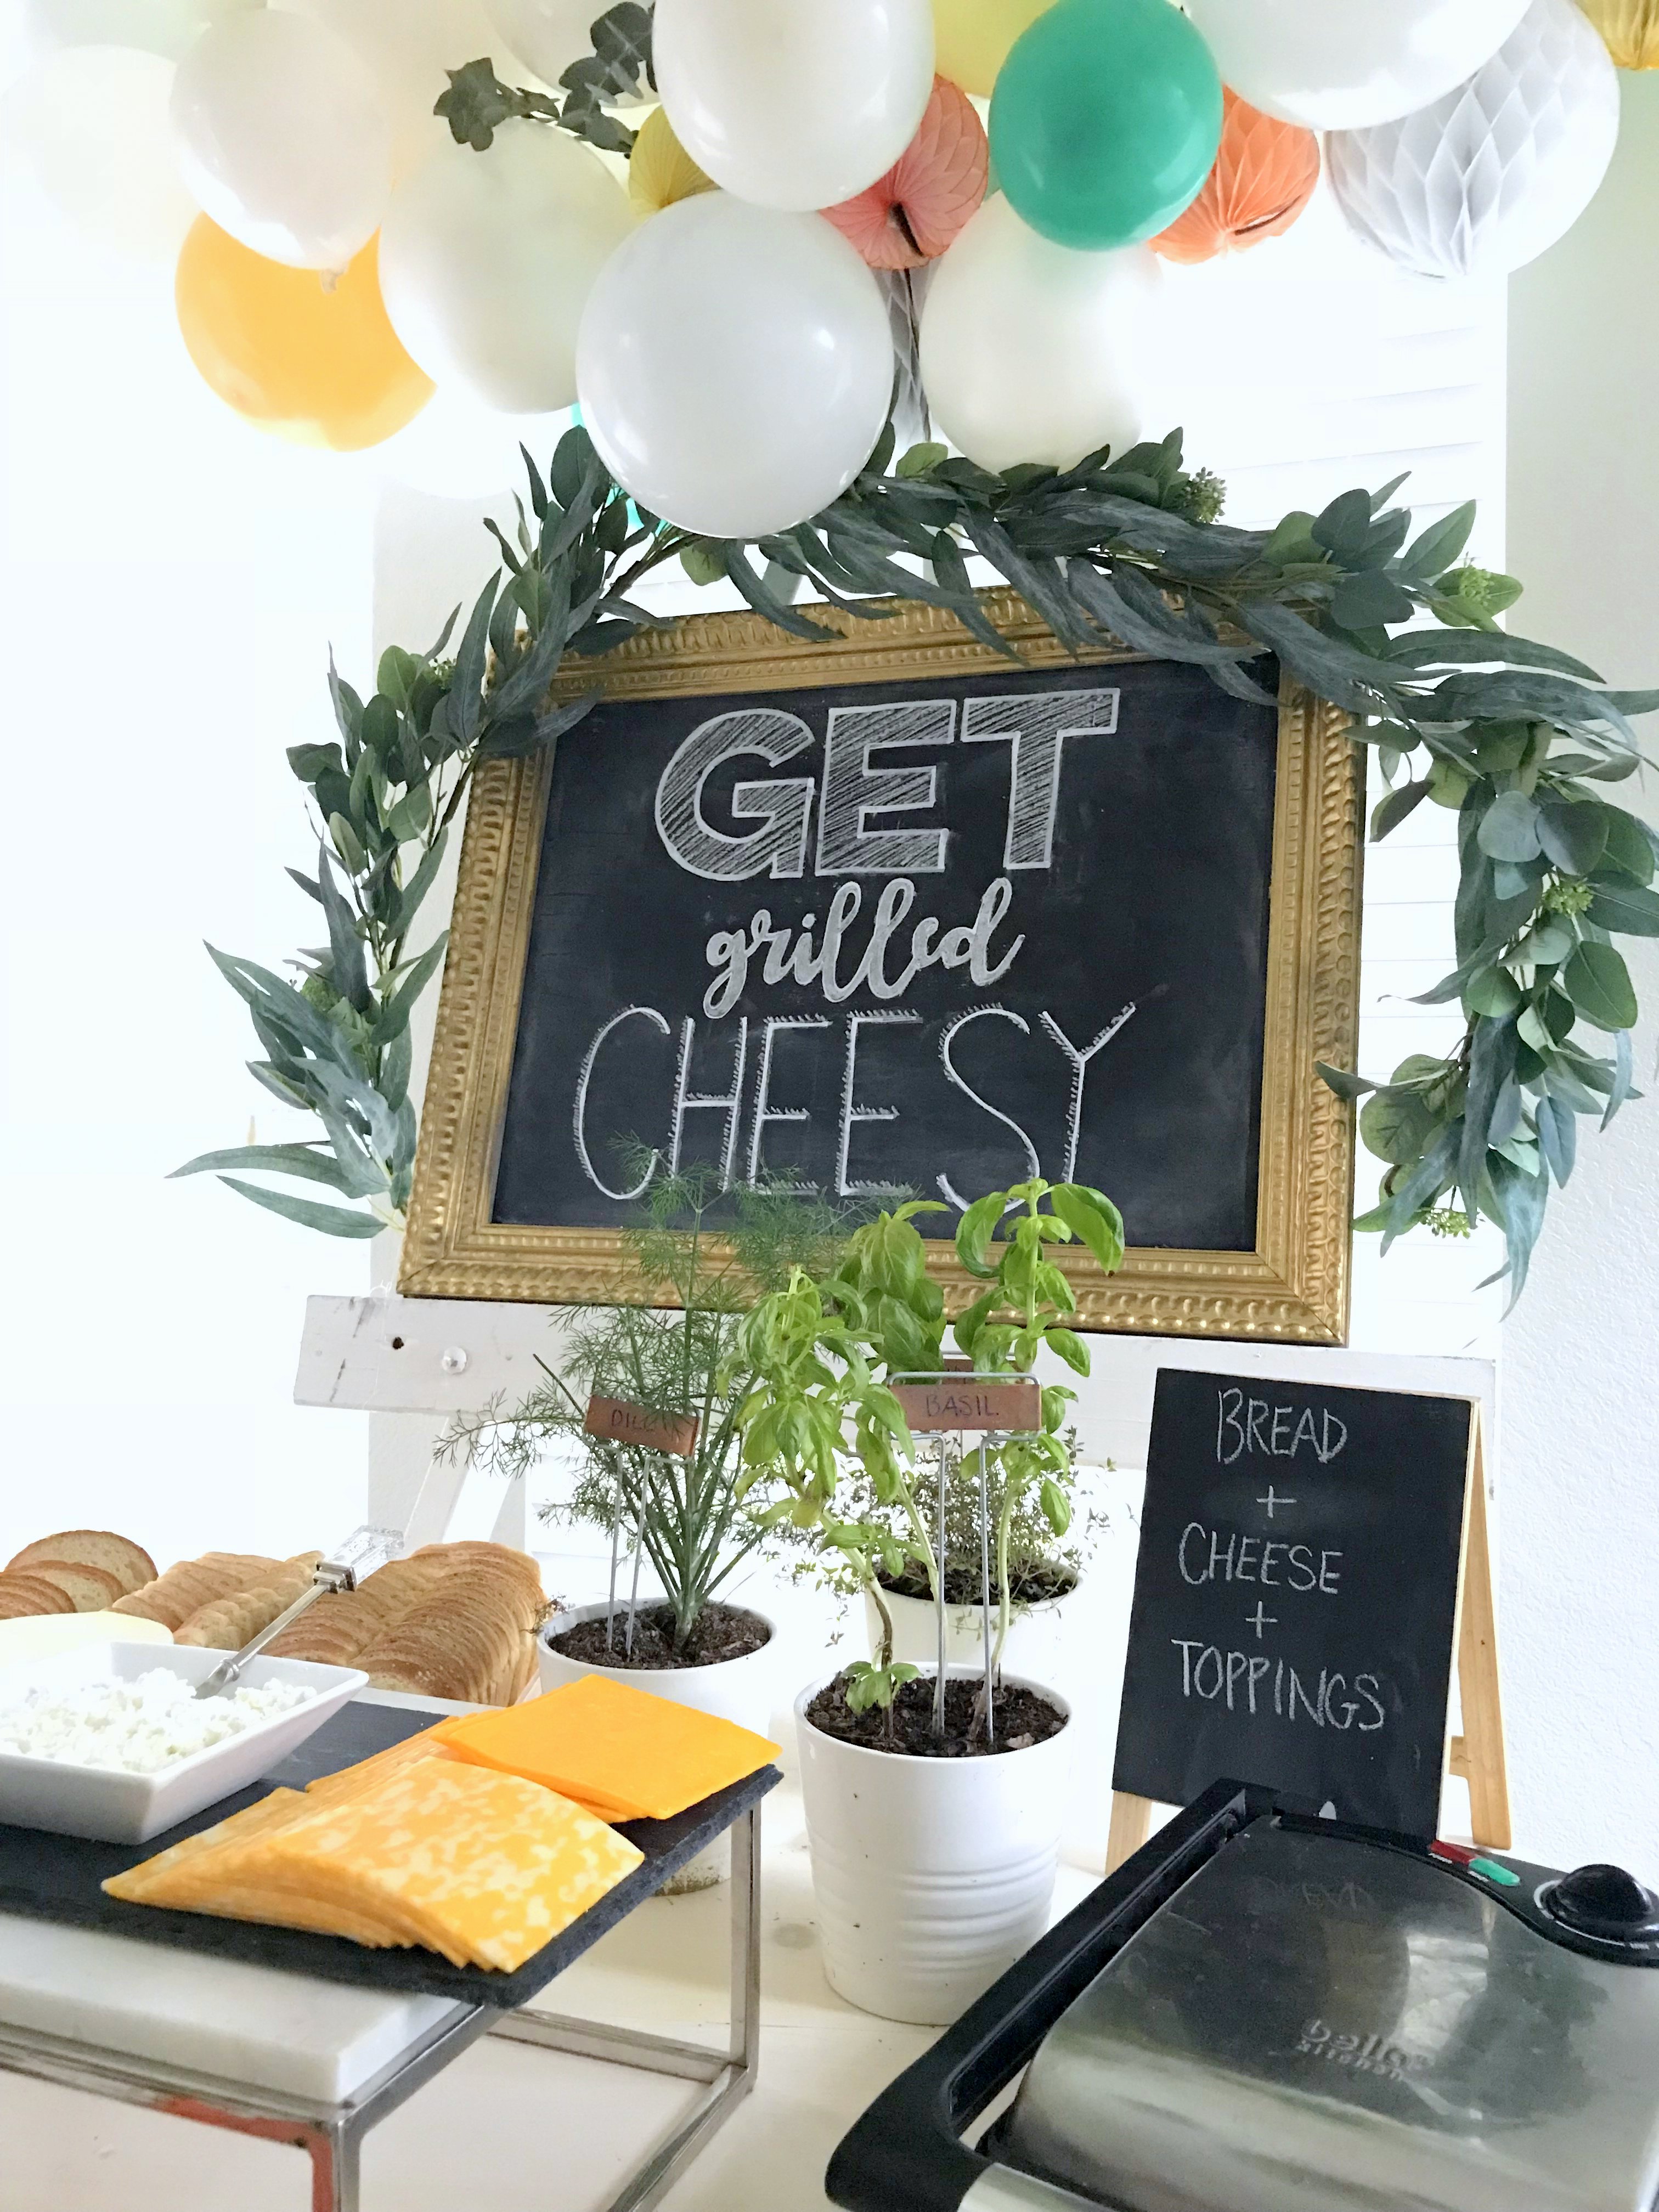 This grilled cheese bar is the ultimate in cozy comfort food! And also SO EASY to put together. (AKA- party food perfection!)